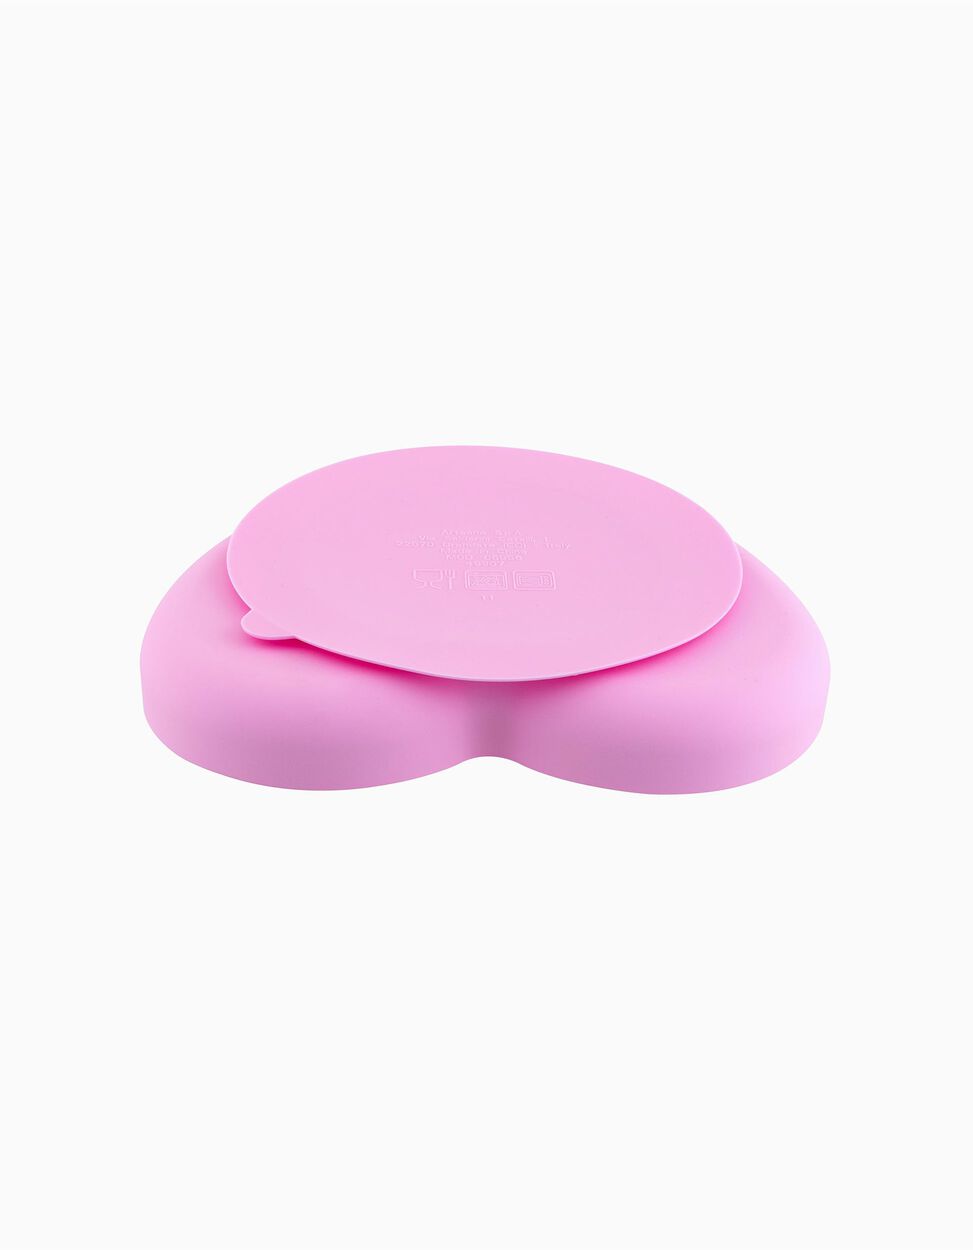 Prato Silicone Eat Easy Chicco Heart Pink